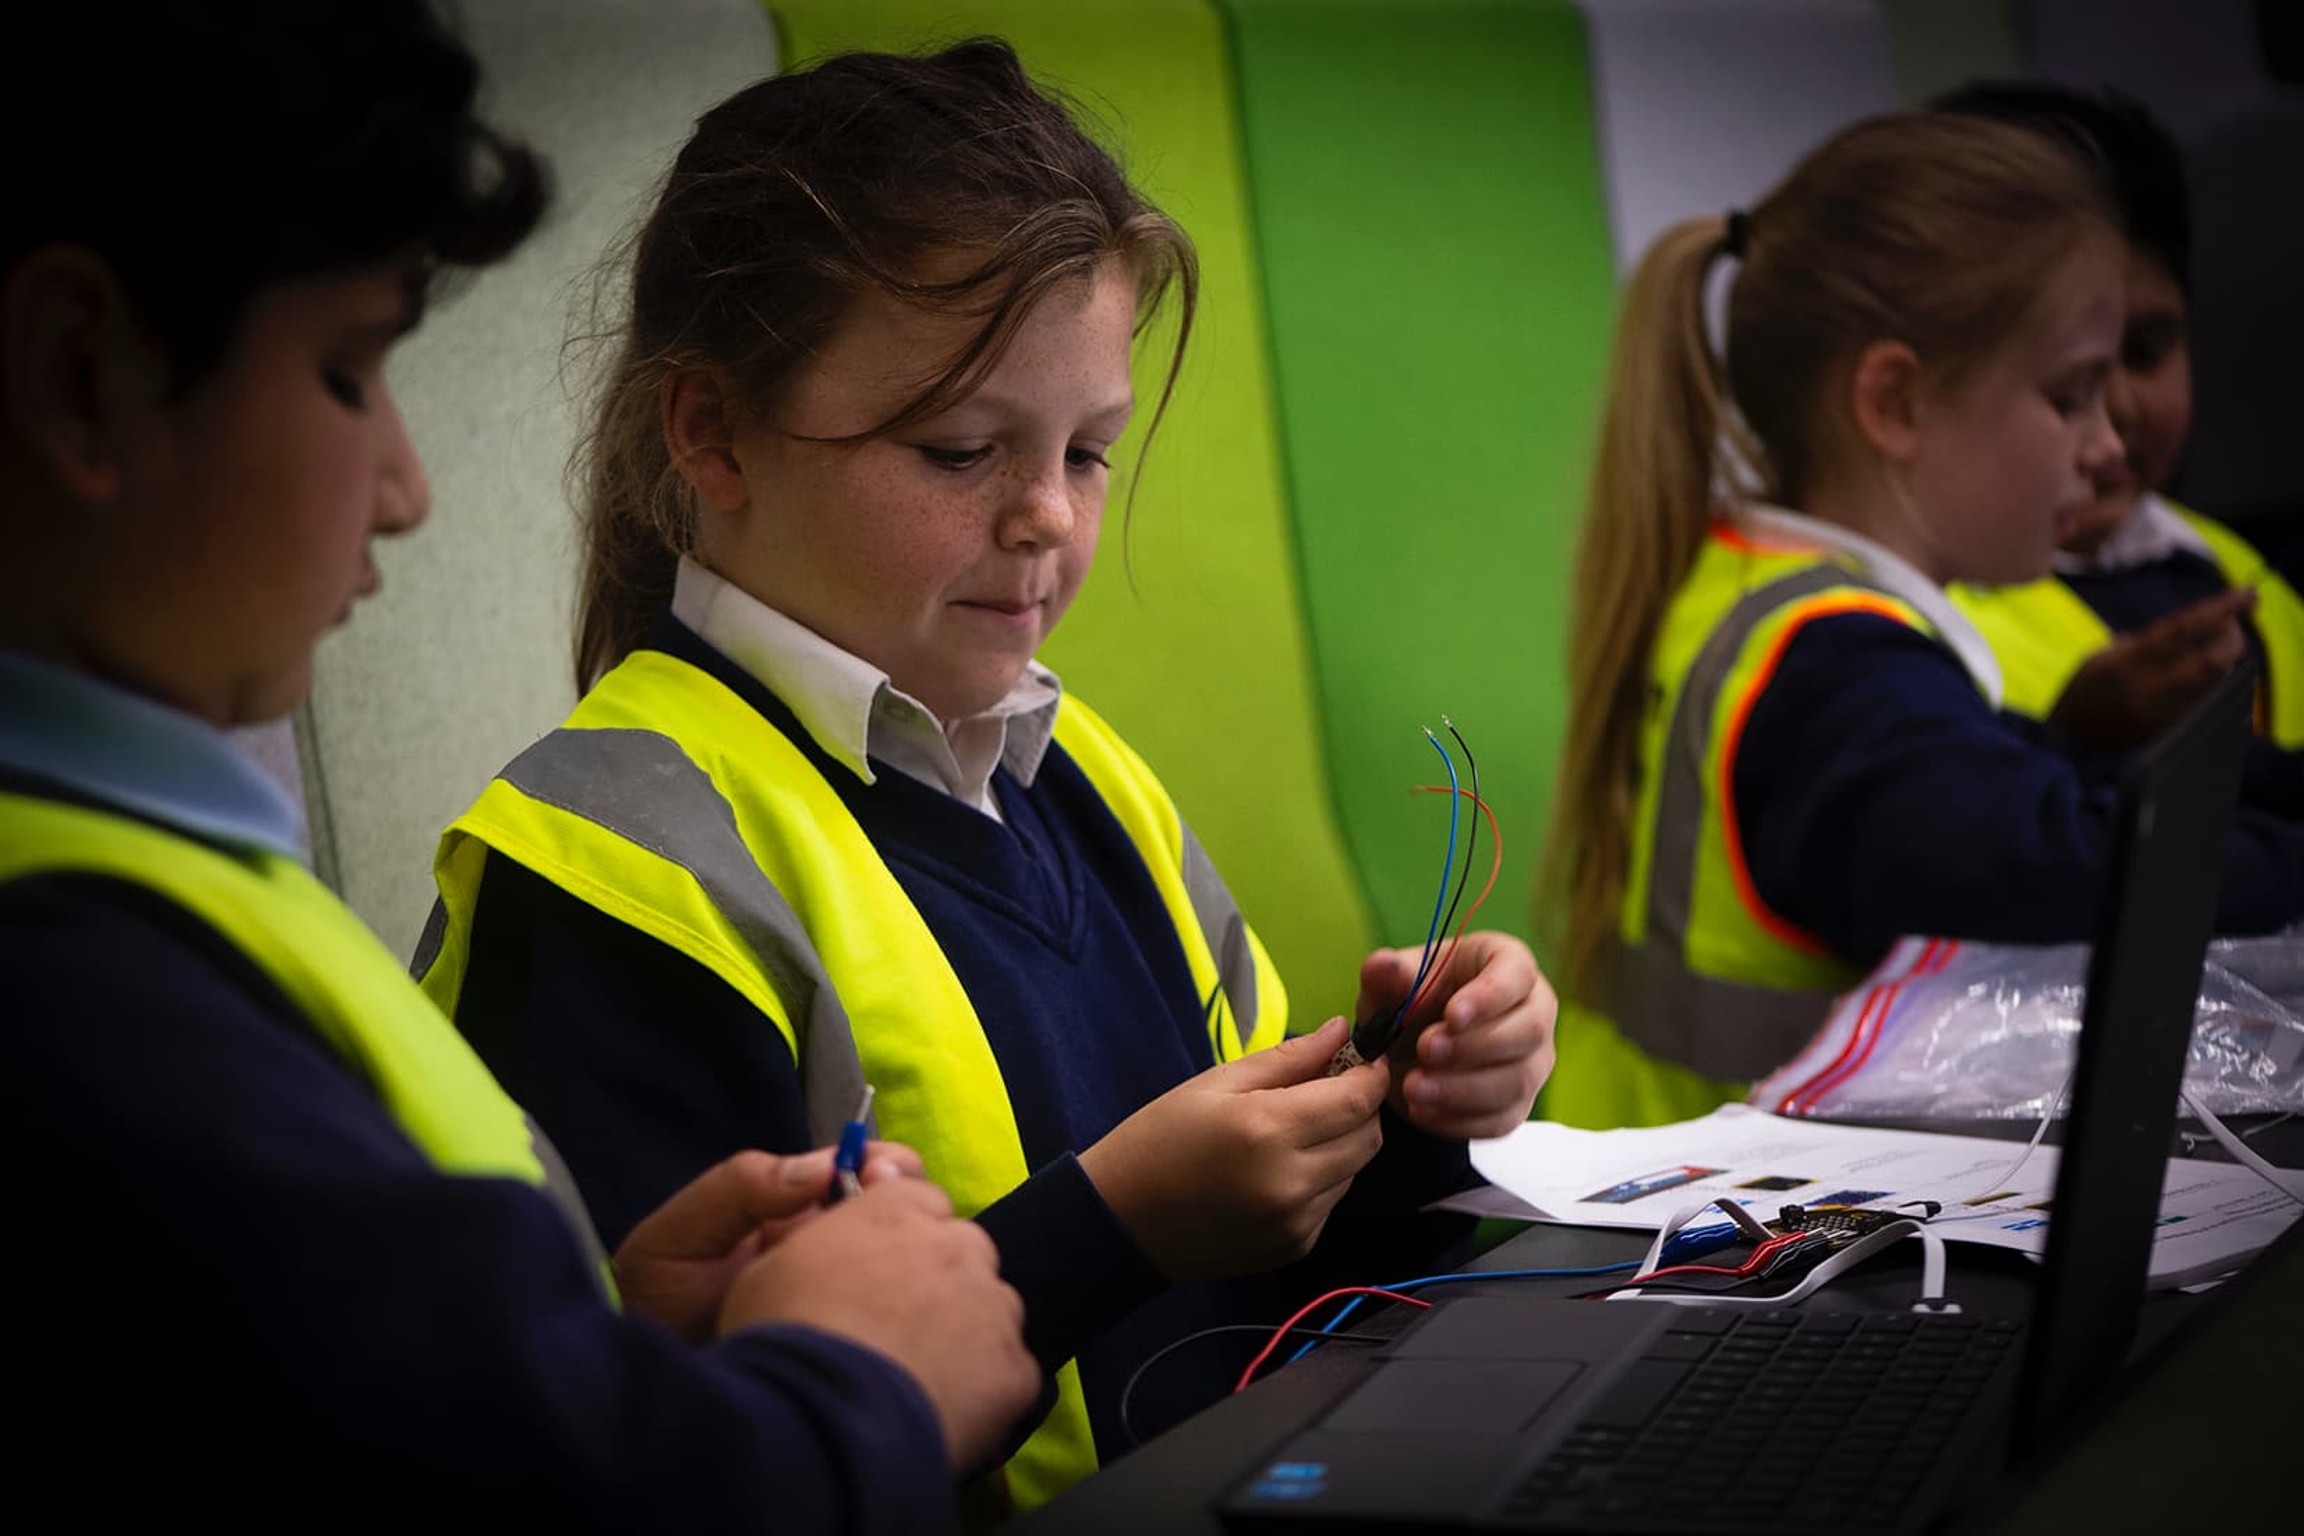 Children learning how to code during Enterprise Week